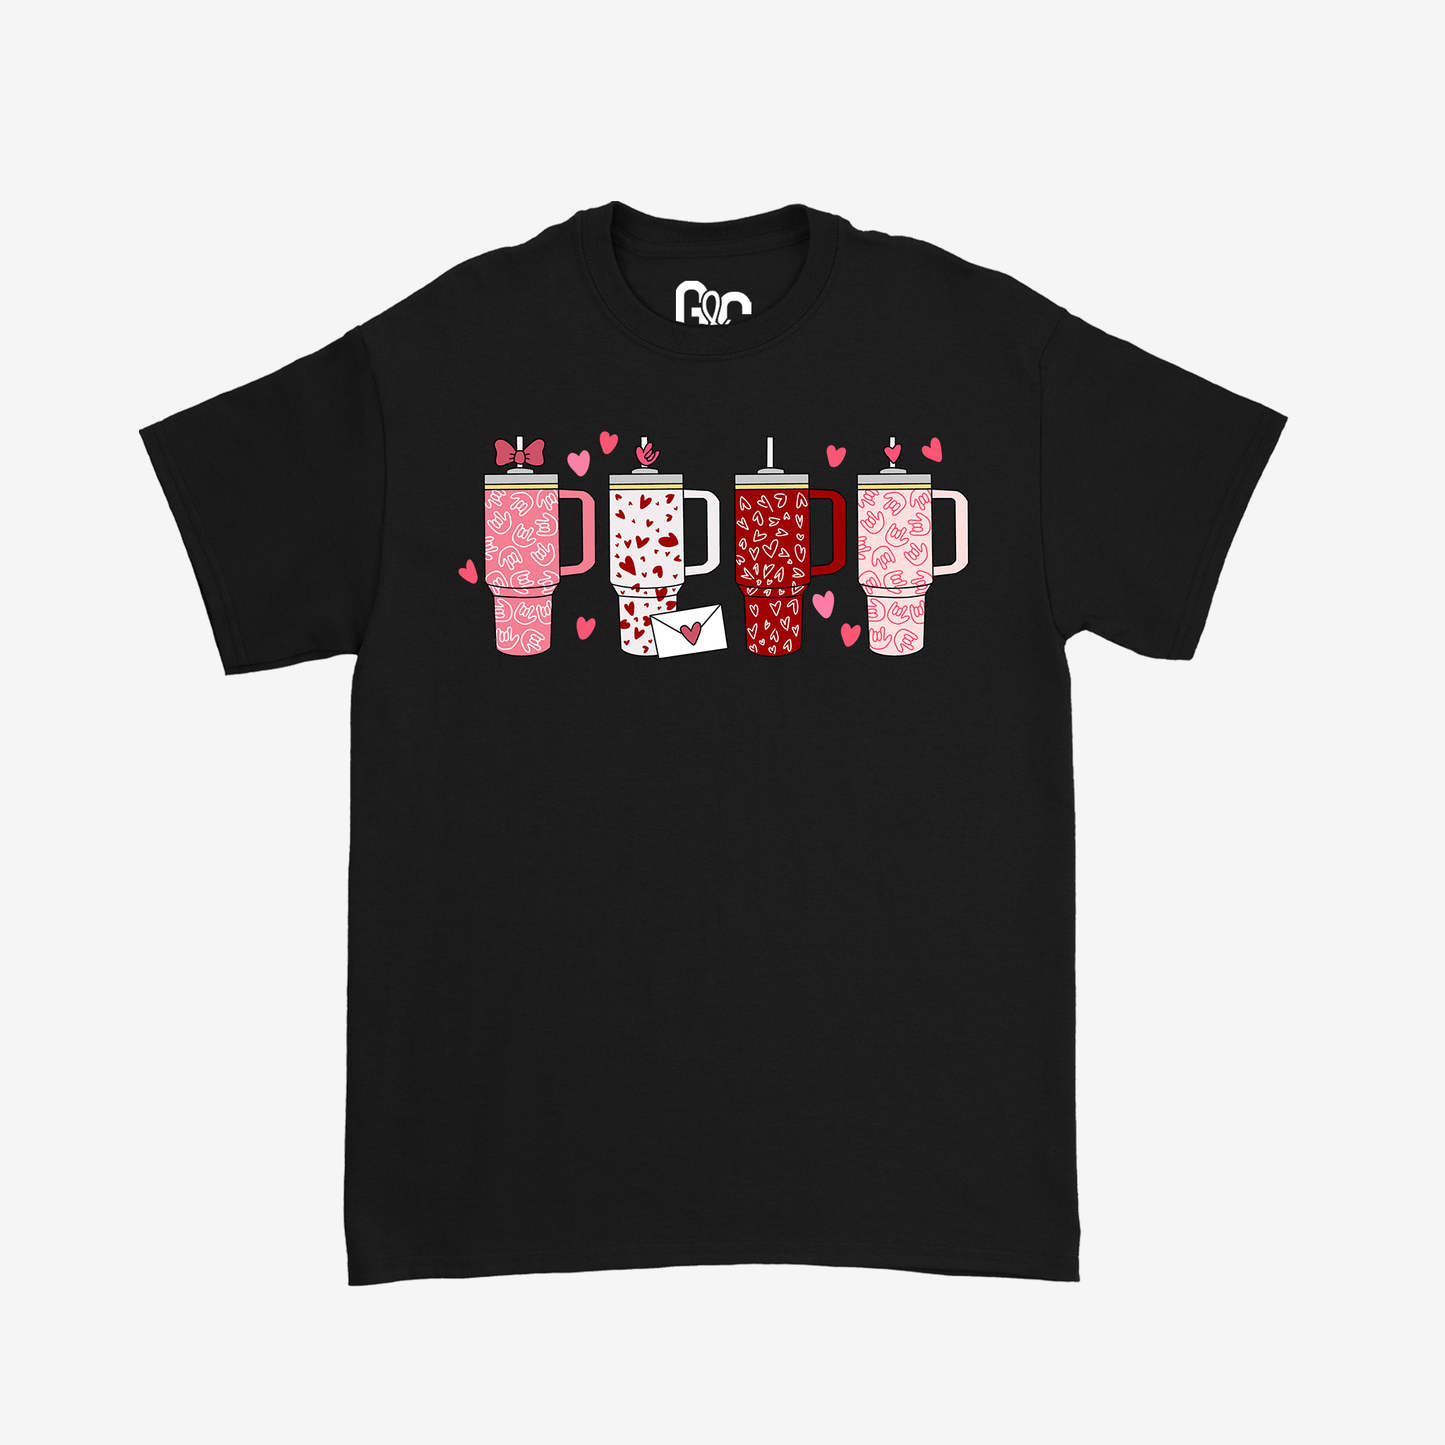 Stanley V-Day Cup Tee